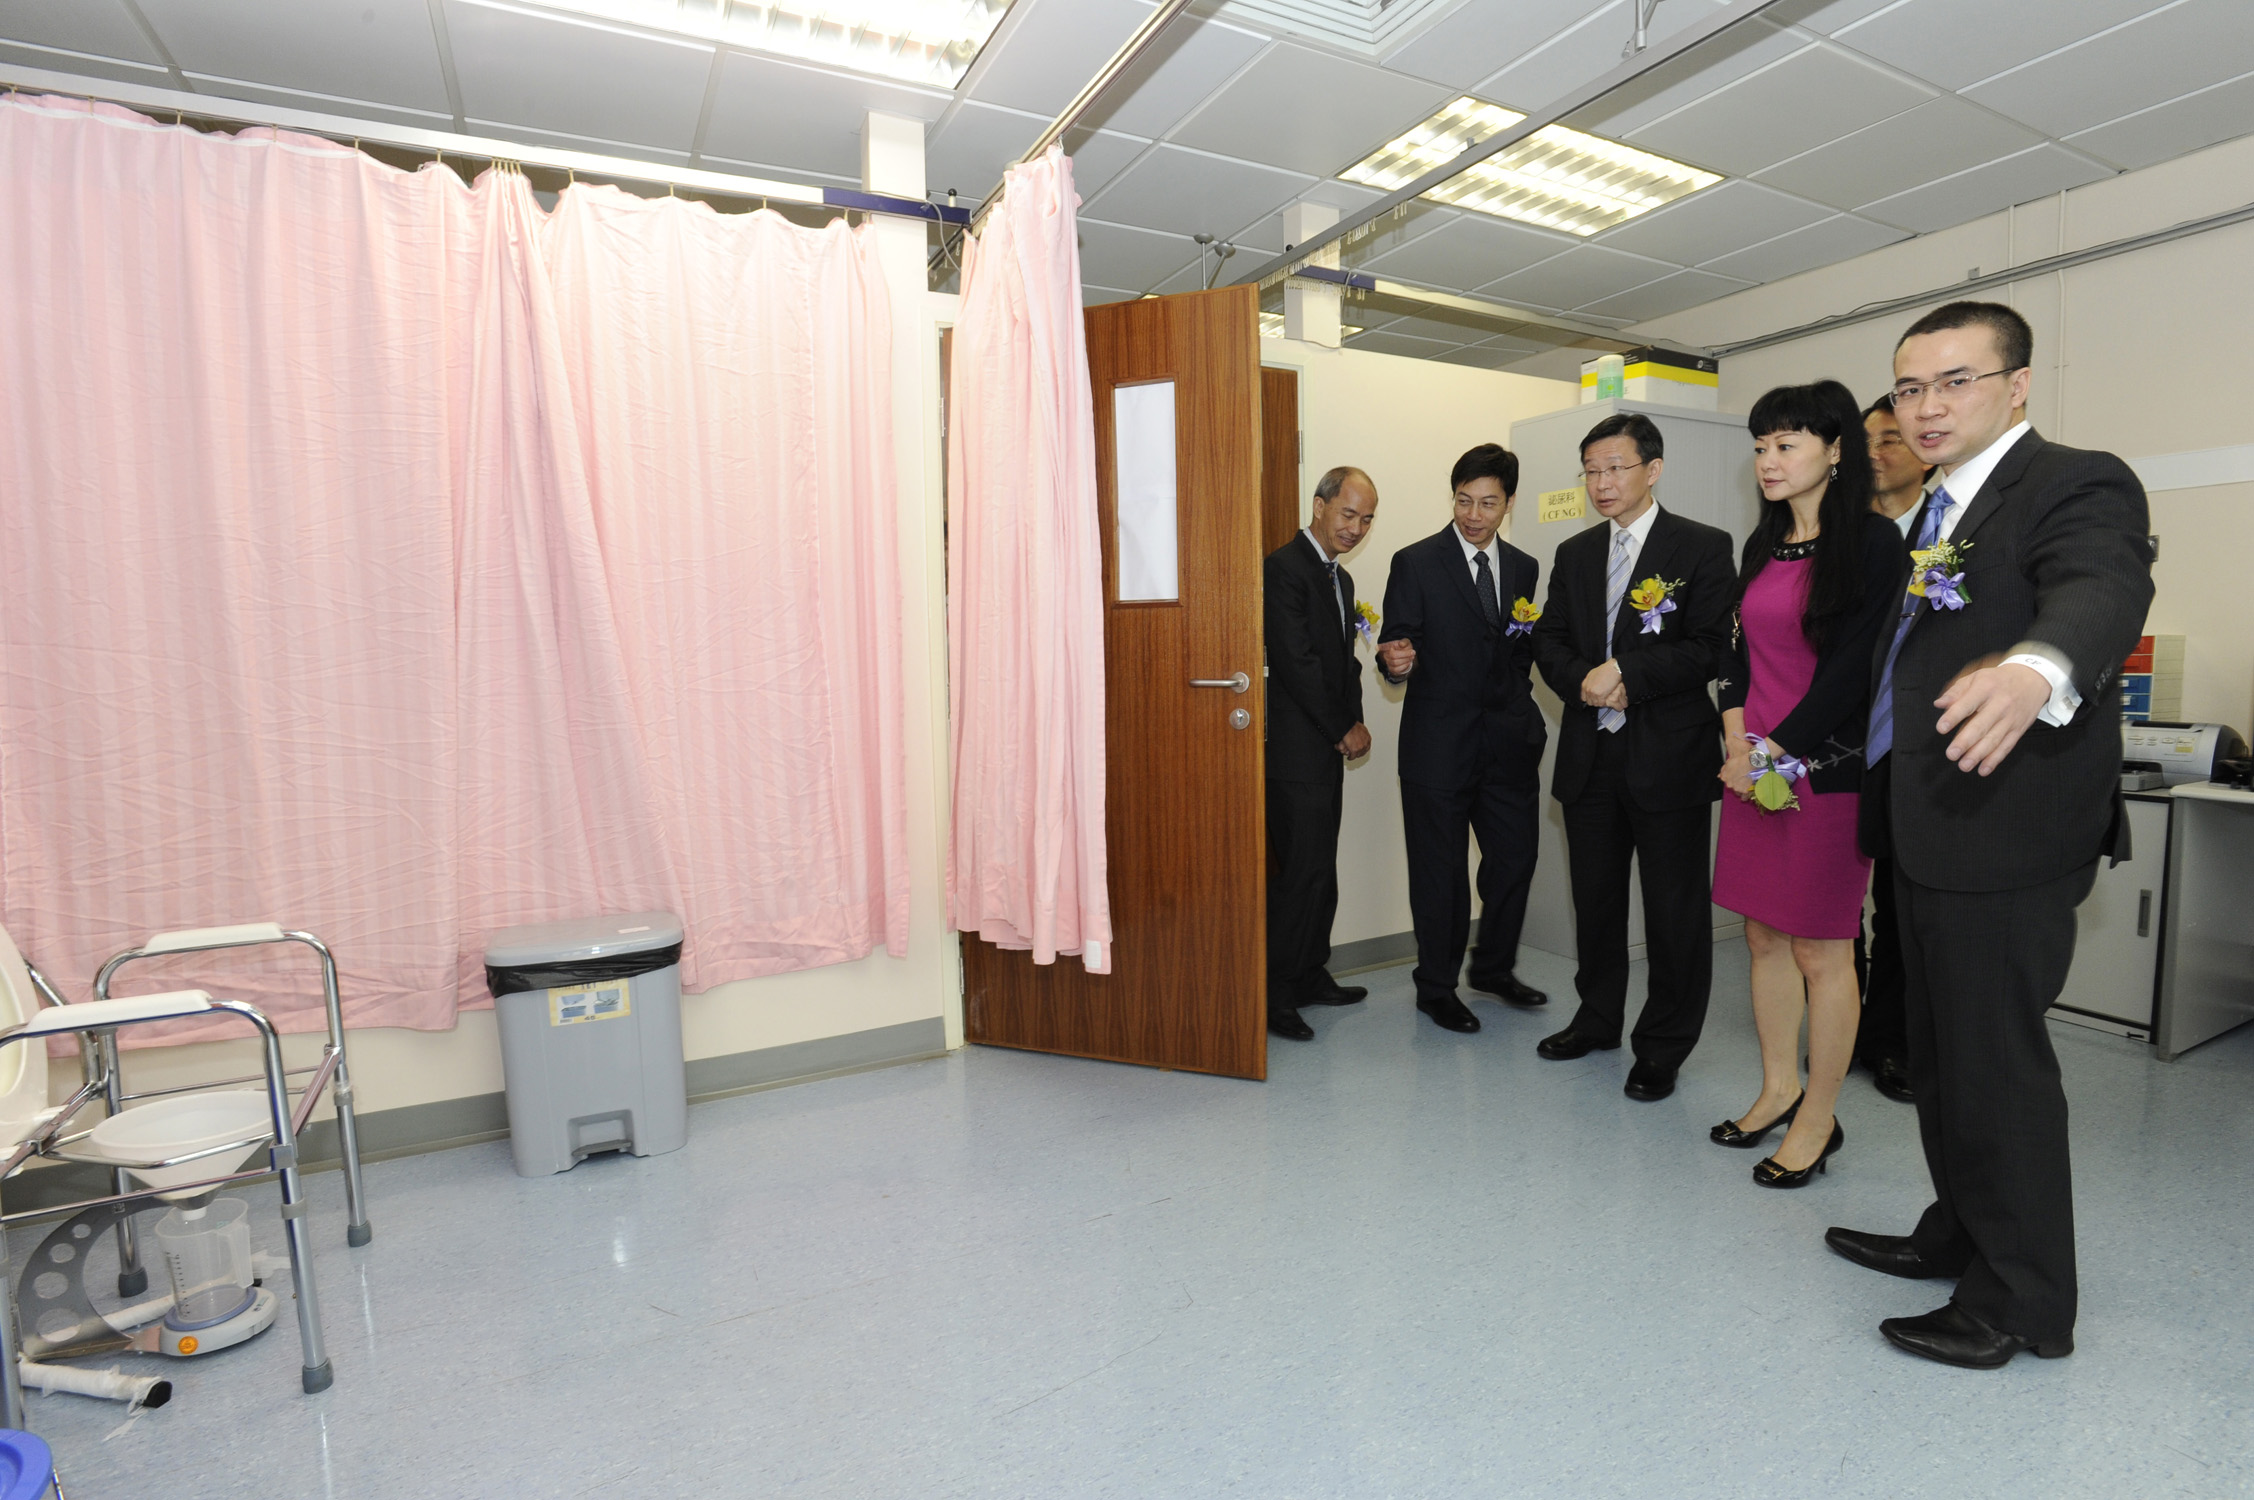 Prof. NG Chi-fai Anthony, Professor, Division of Urology, Department of Surgery, CUHK shows the officiating guests the one-stop services of the Youth Urological Treatment Centre (YCTU). The Centre will provide with the young drug abusers the least invasive investigation including urine analysis, blood tests, uroflowmetry and bladder scan, in addition to the standard clinical assessment